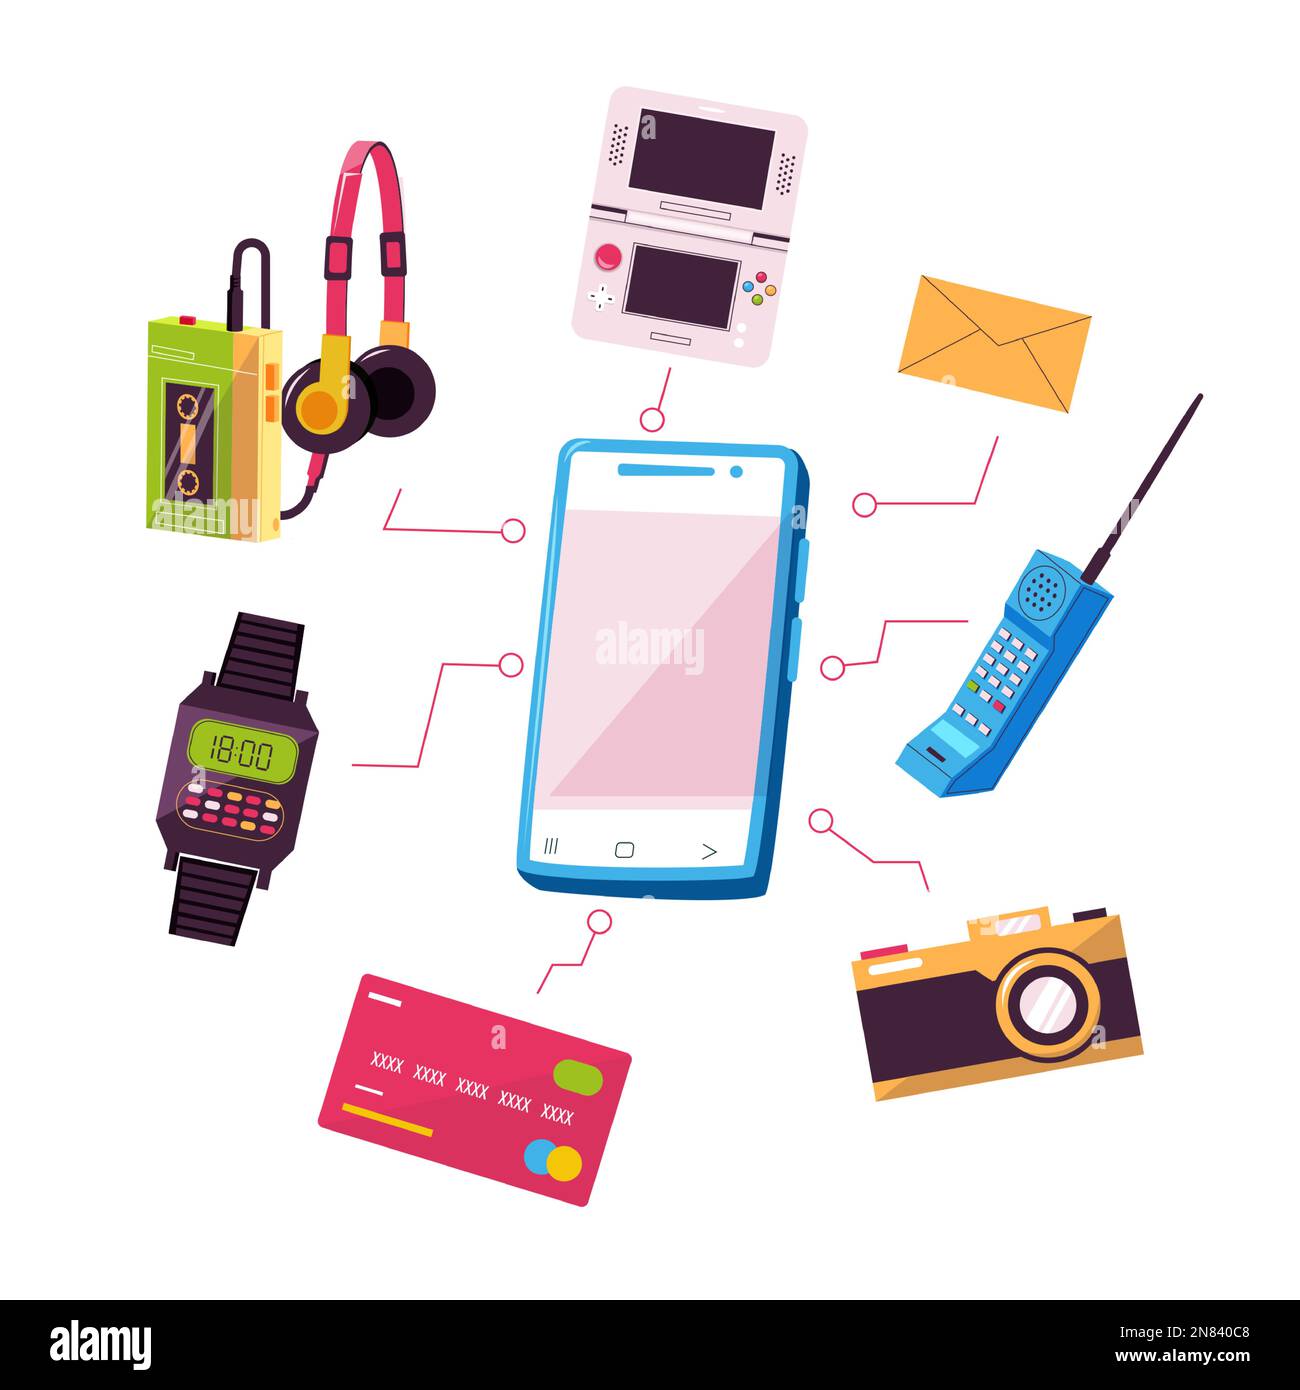 Smartphone replaced devices. Mobile phone multipurpose functionality in comparison with retro analog devices, nostalgic 90s concept. Vector Stock Vector